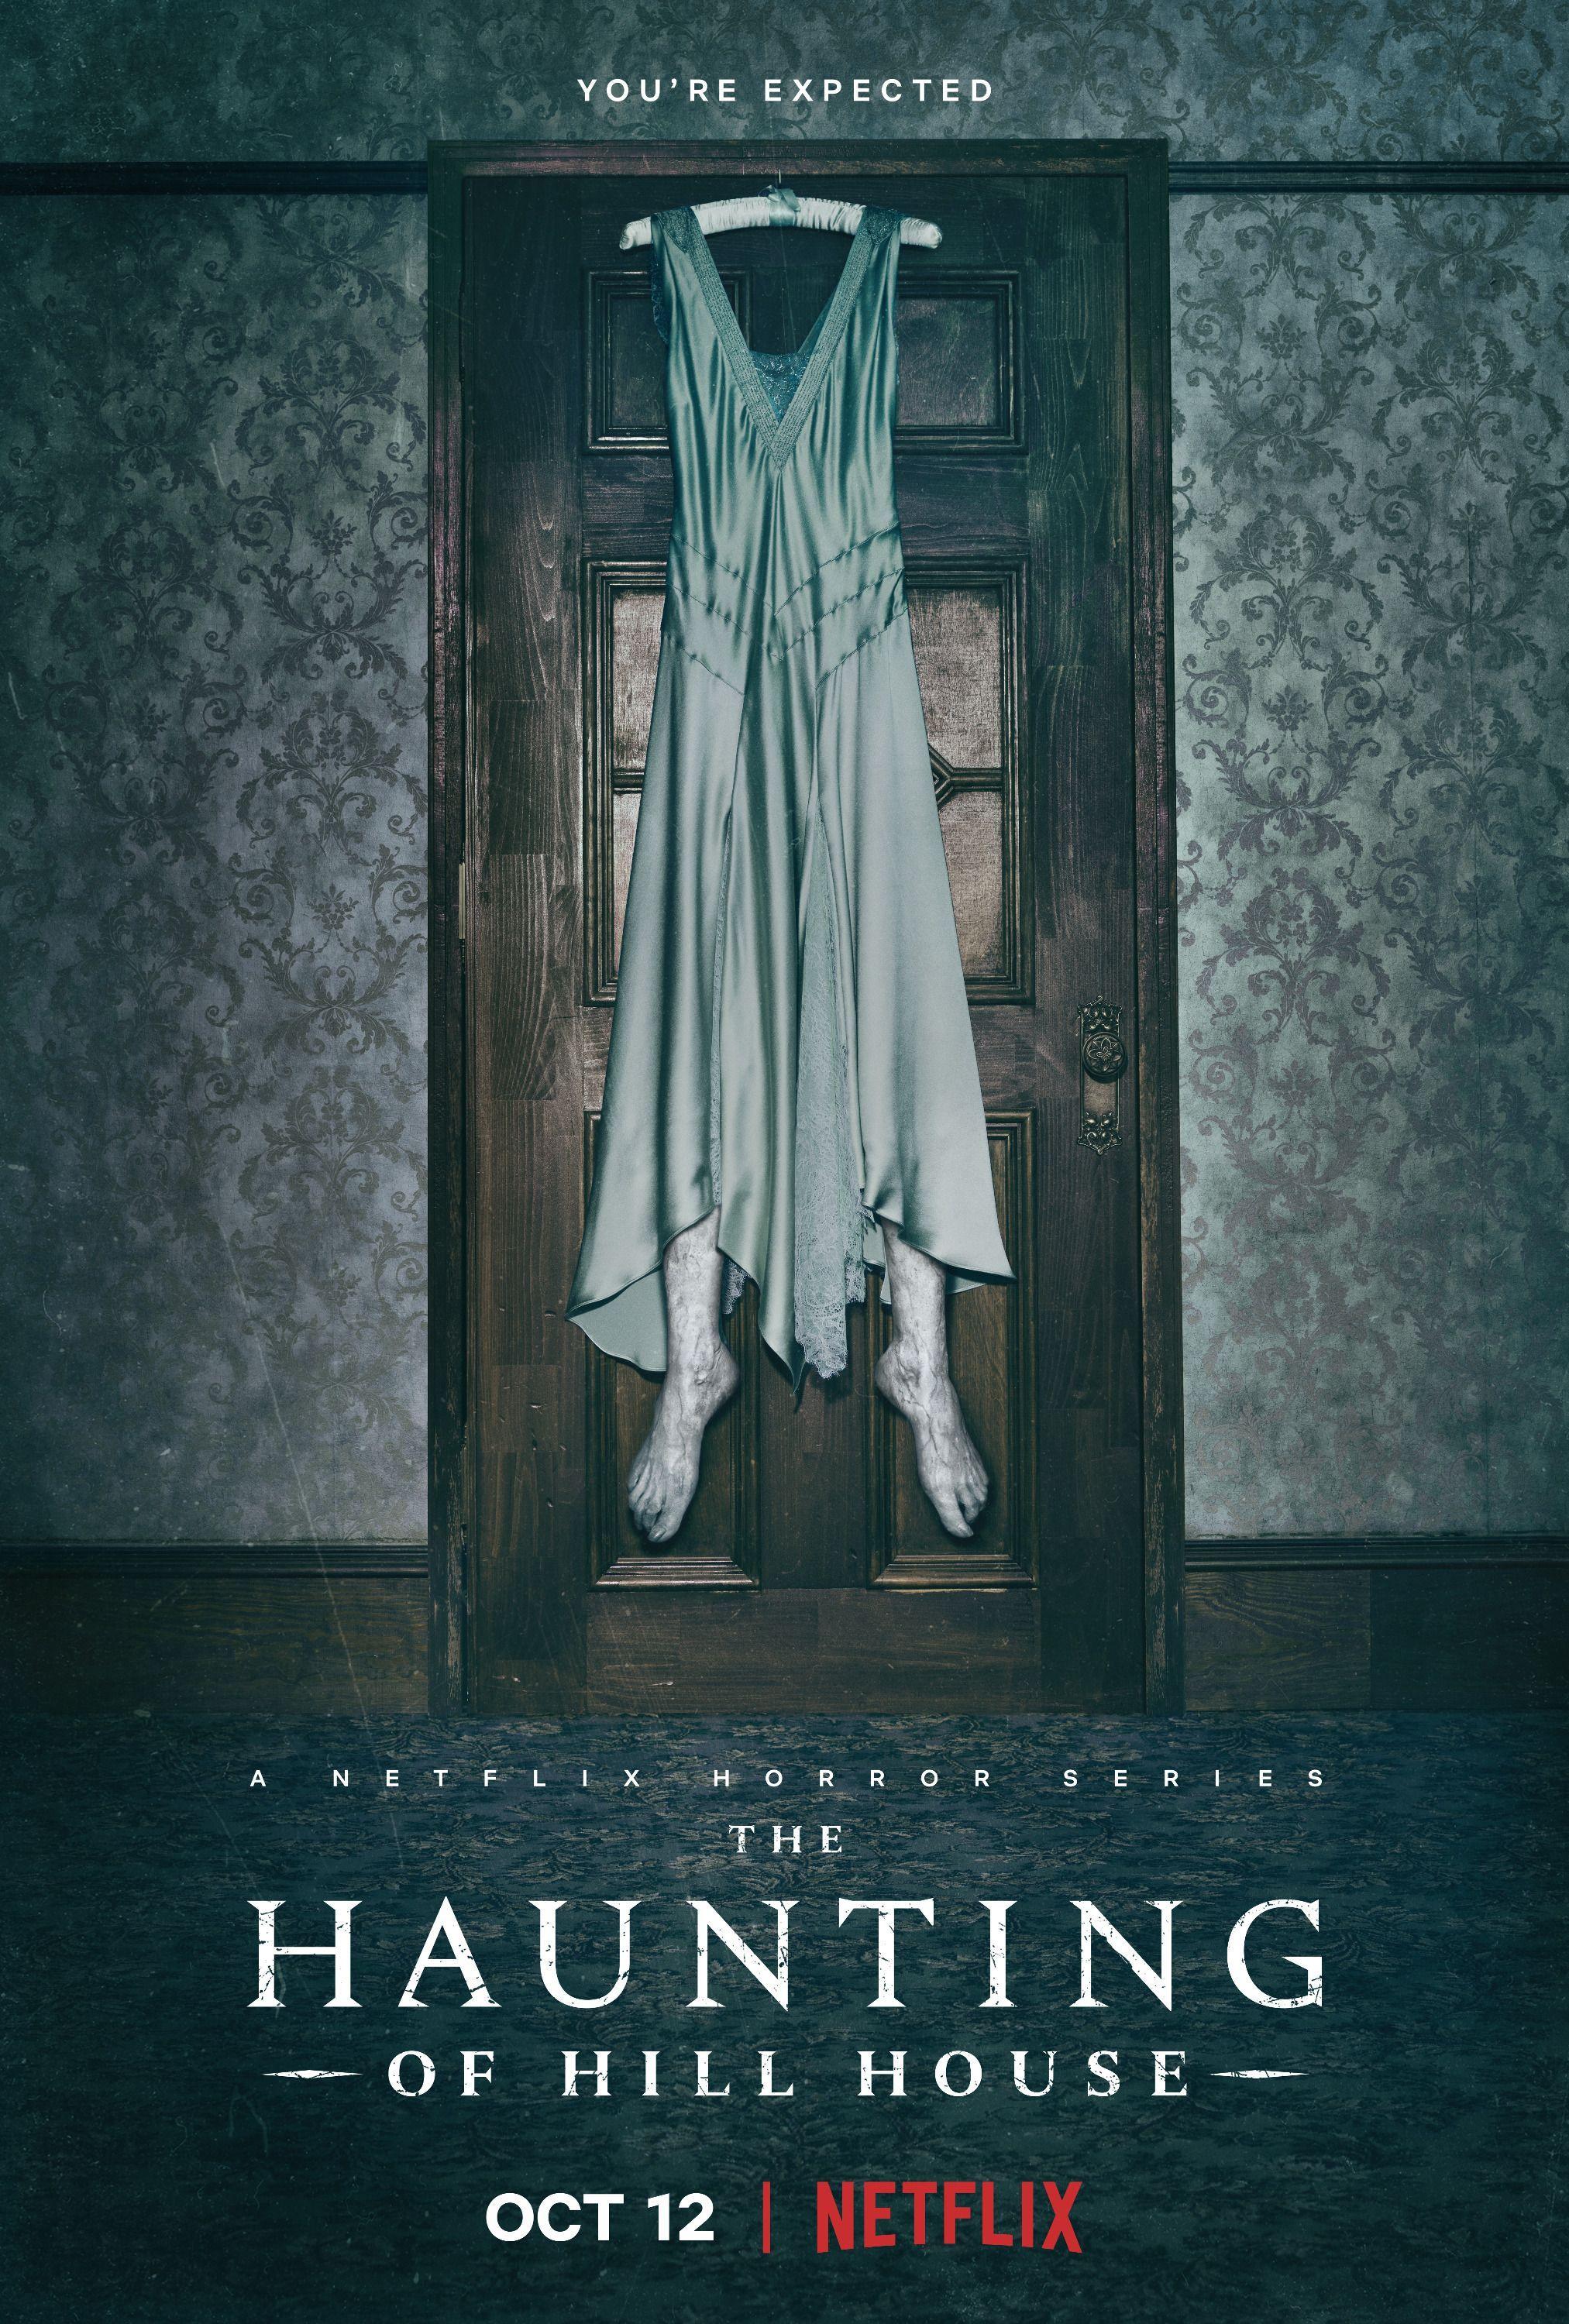 The Haunting of Hill House. Android wallpaper in 2018